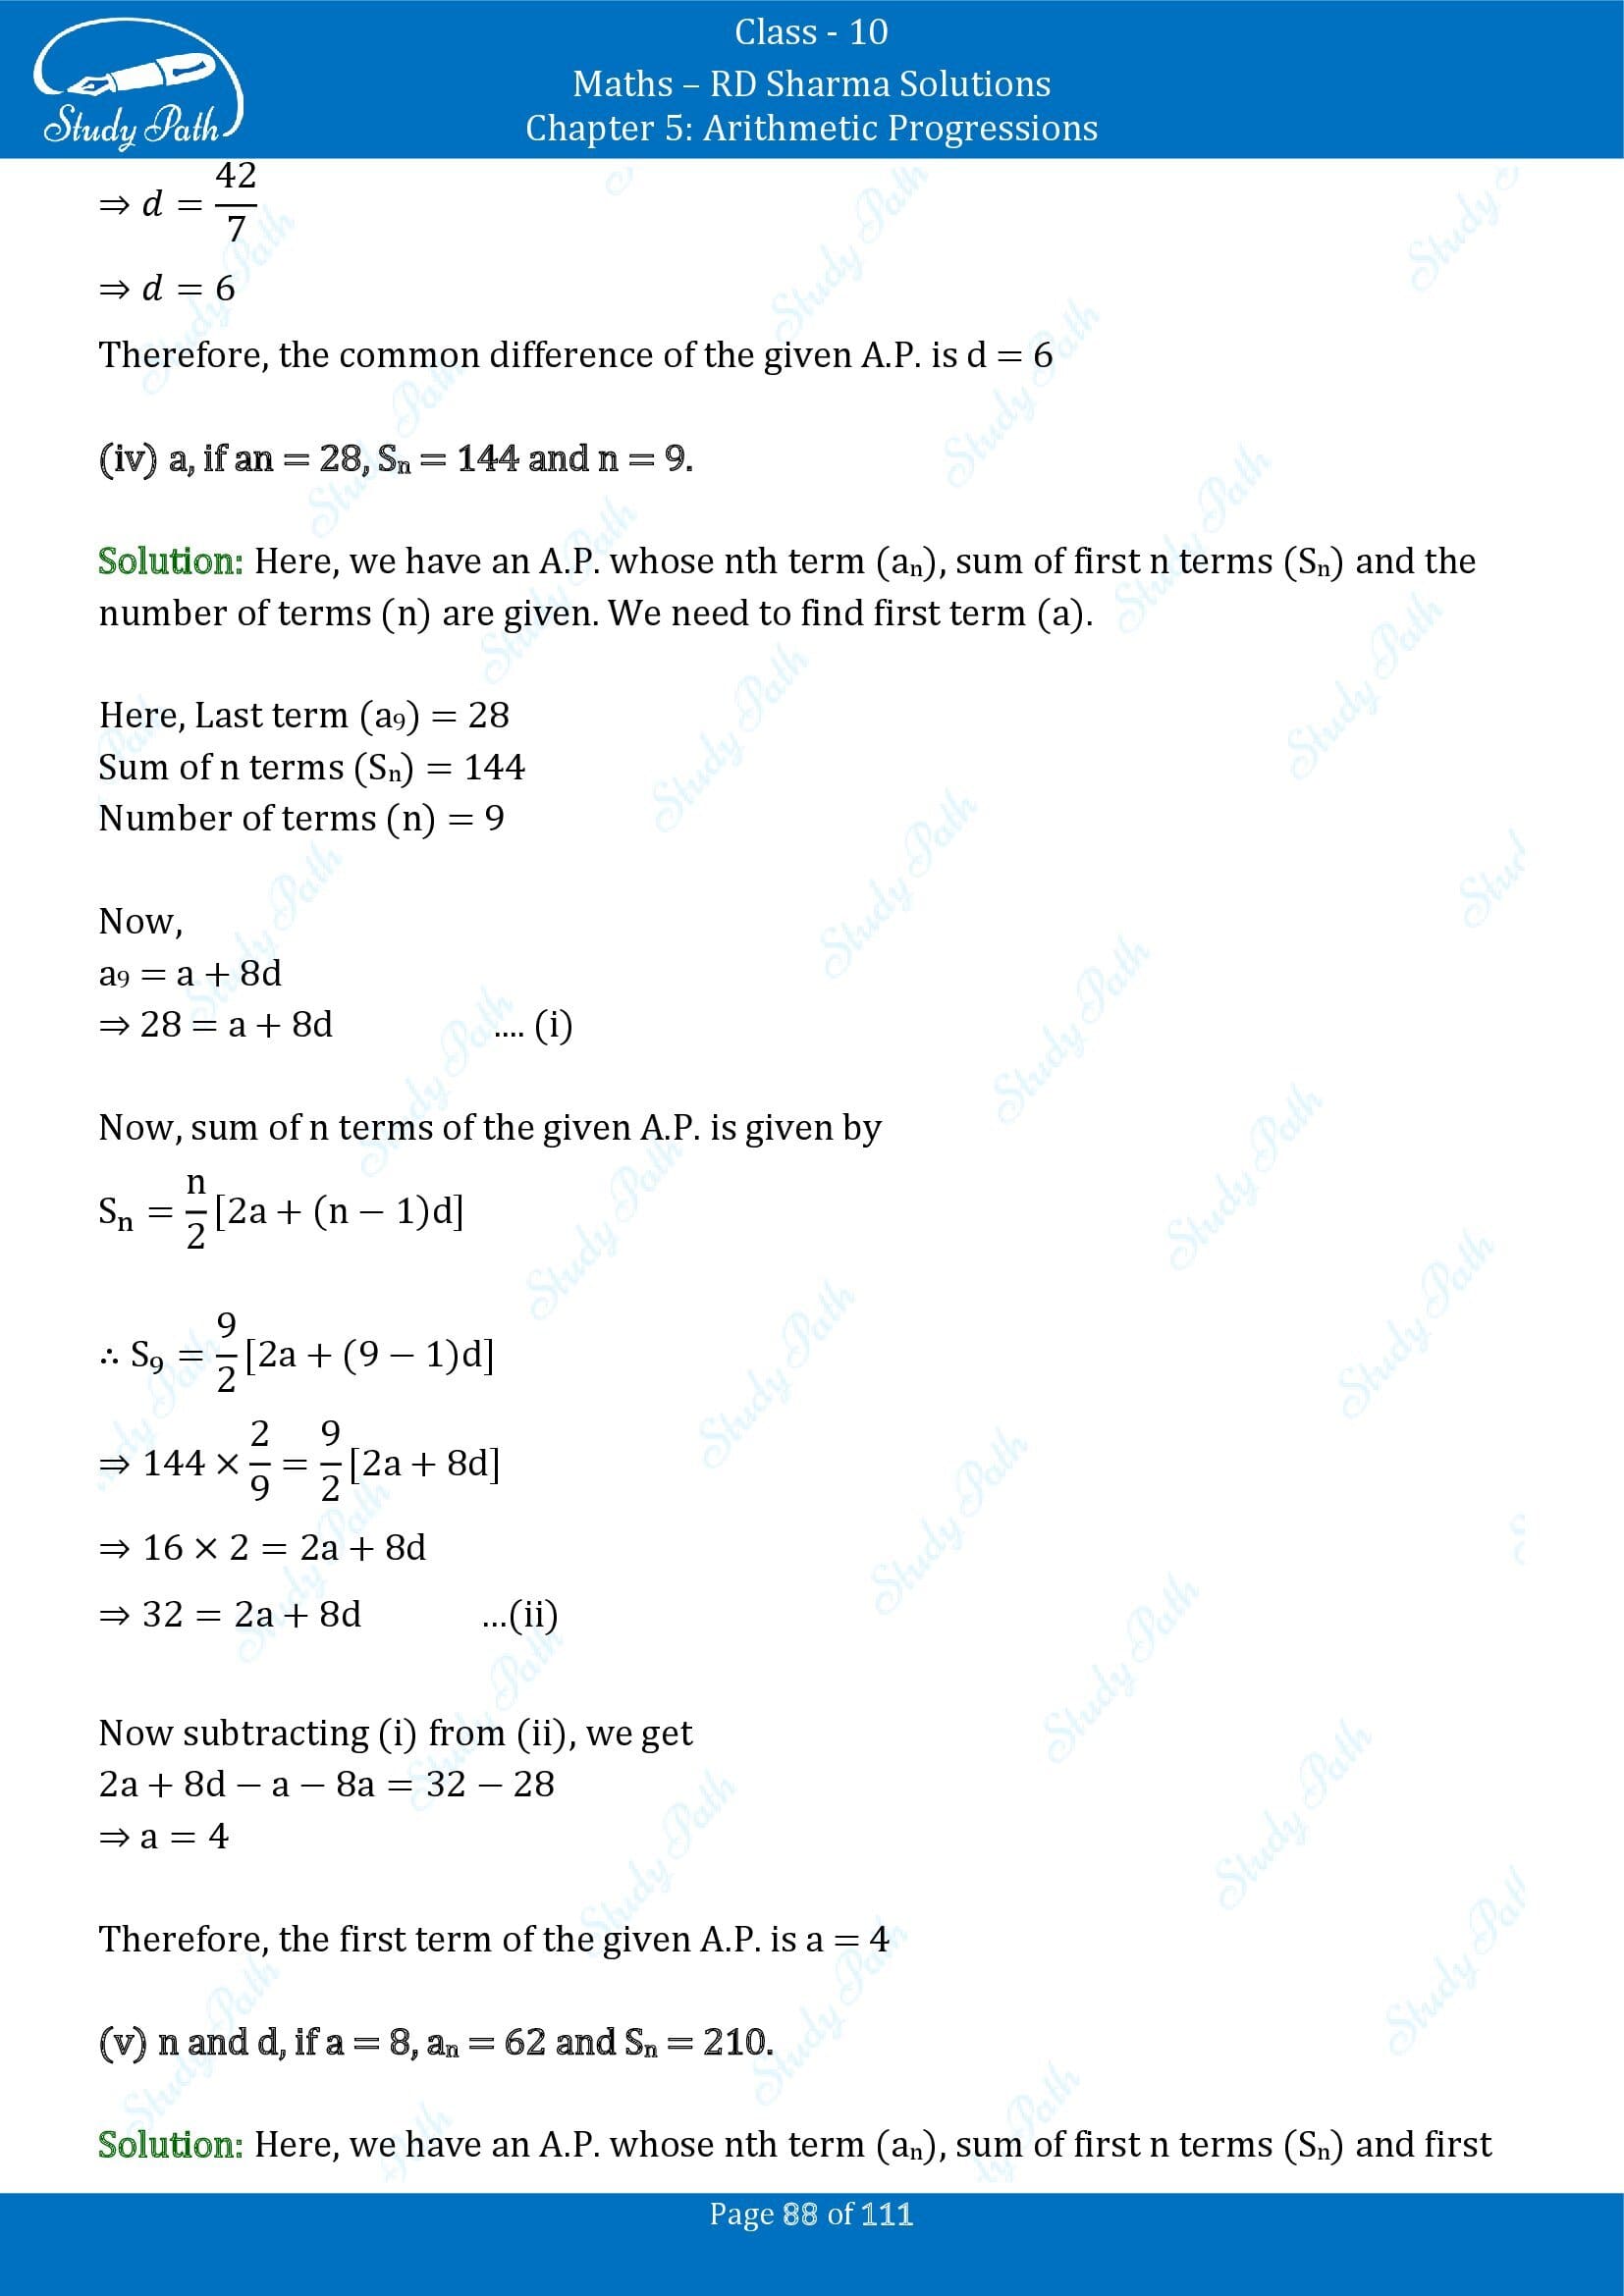 RD Sharma Solutions Class 10 Chapter 5 Arithmetic Progressions Exercise 5.6 00088